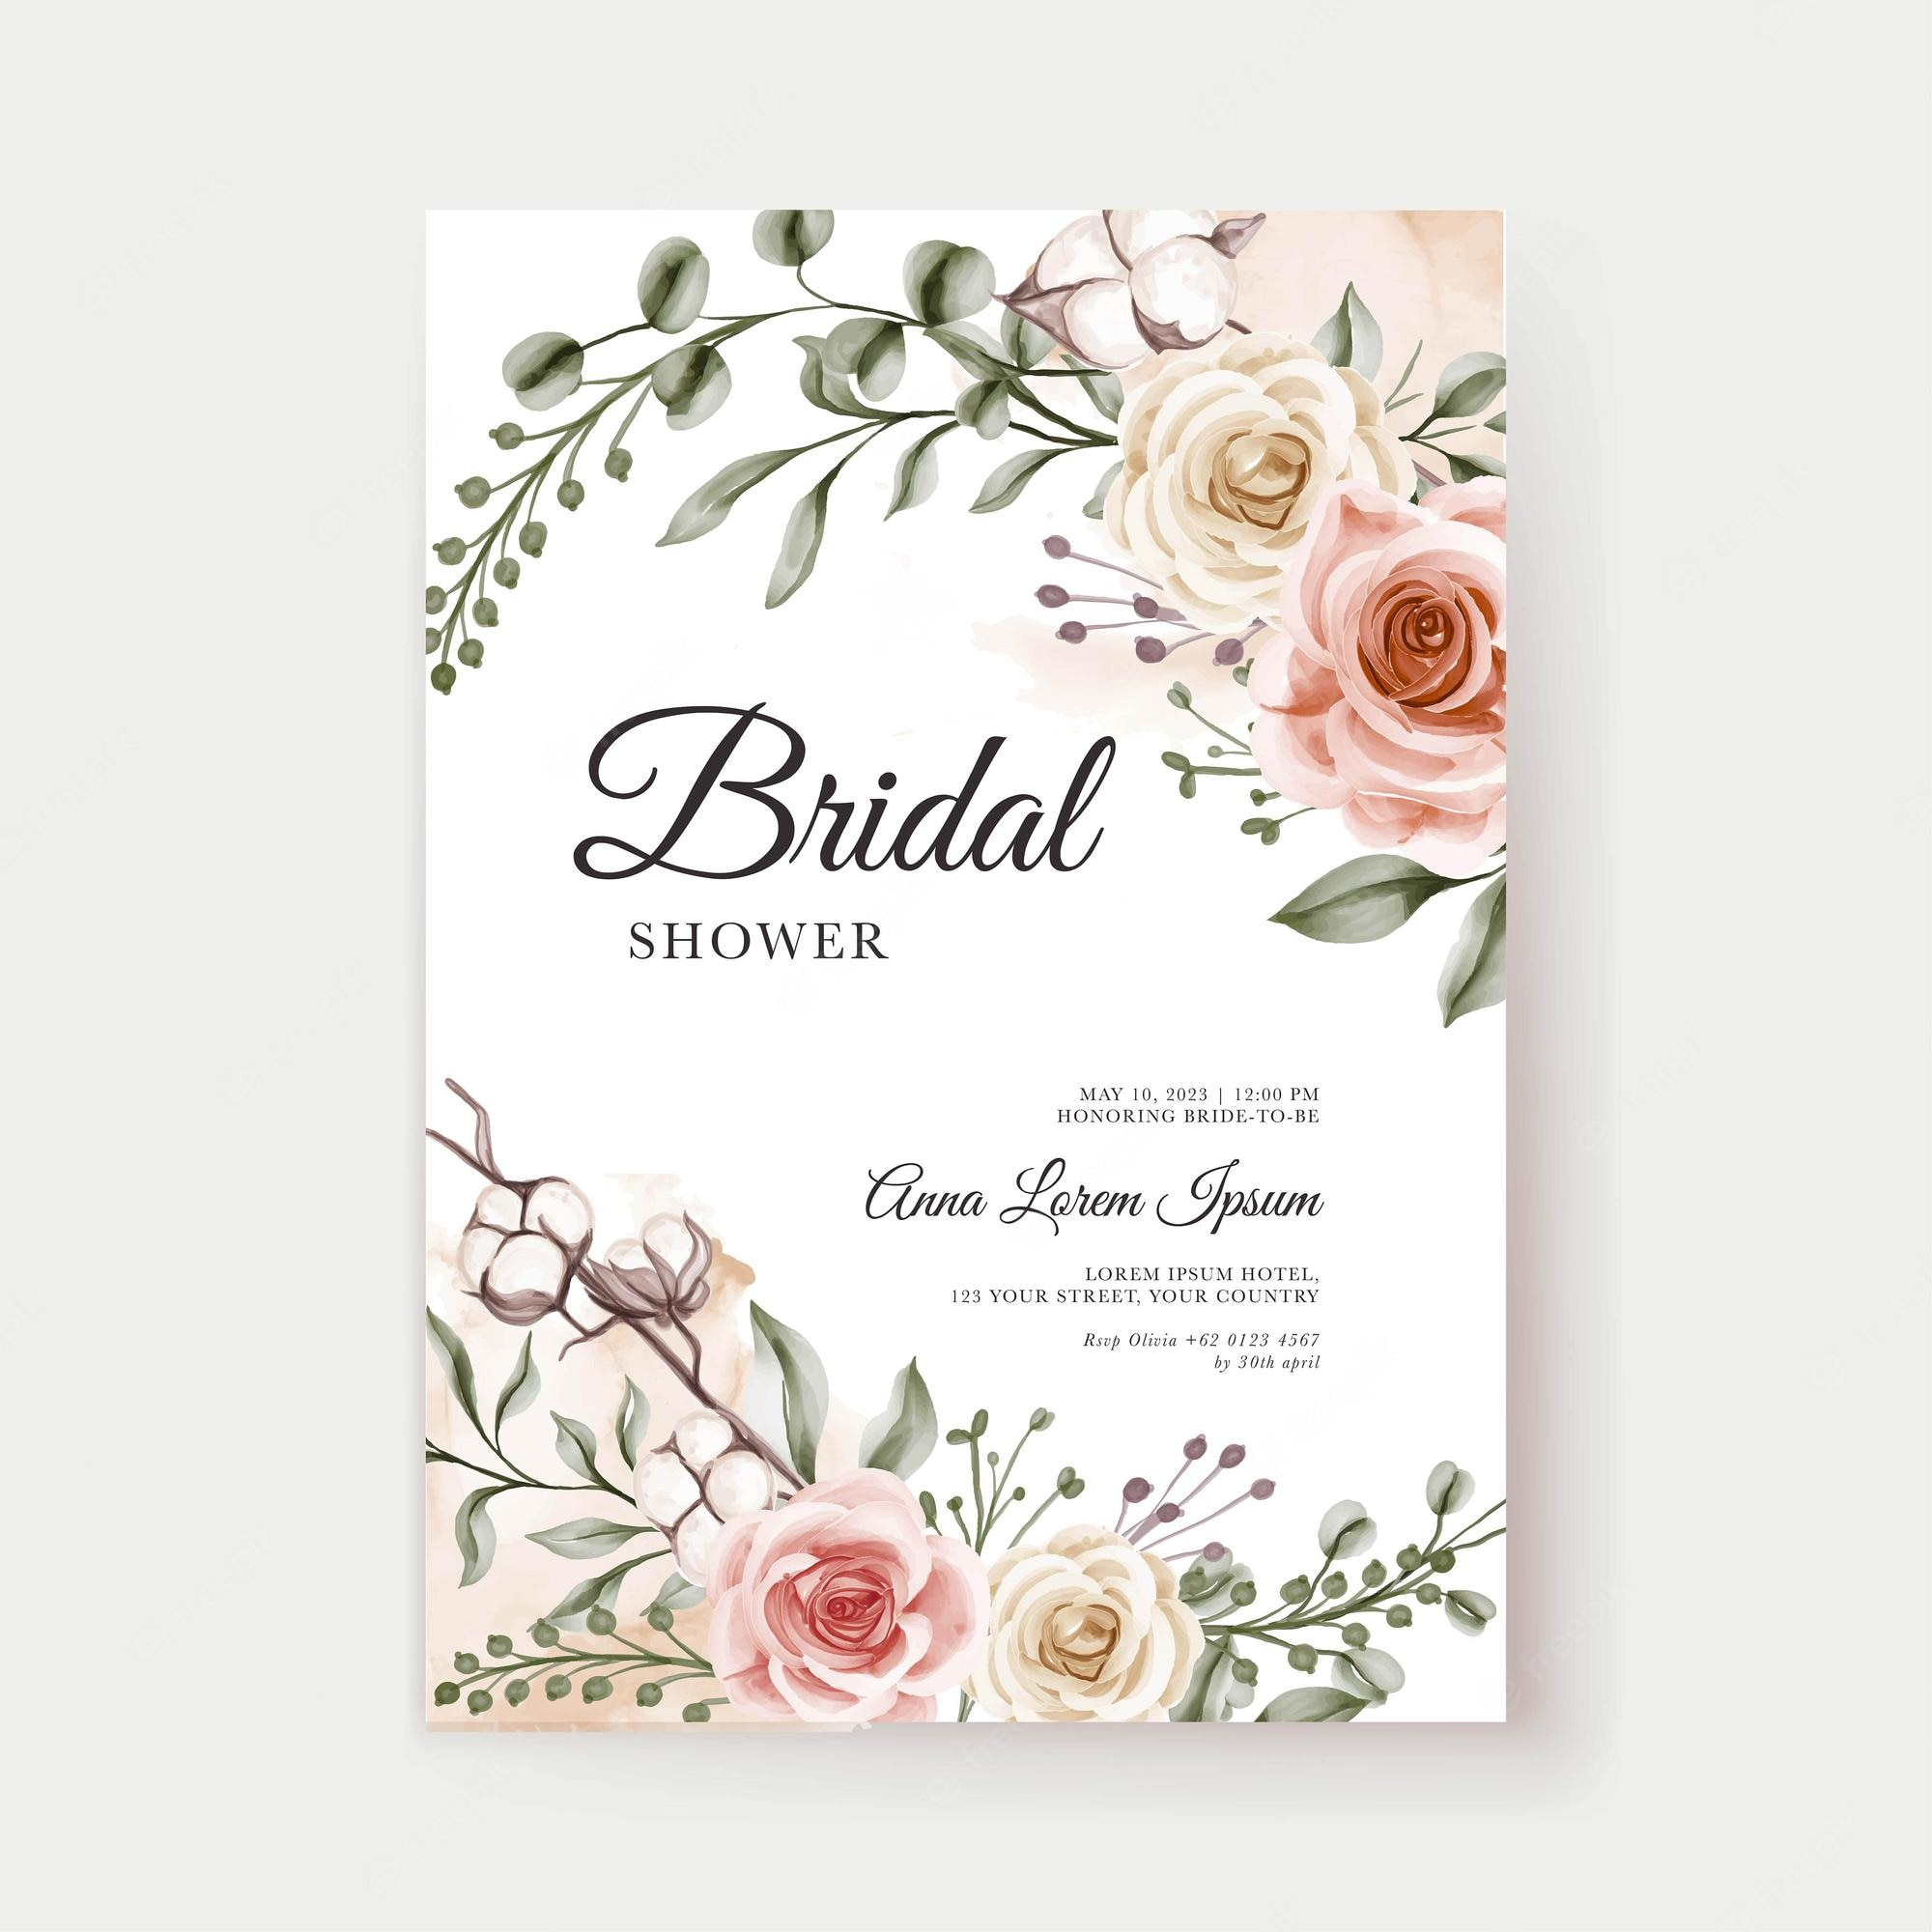 Bridal Shower Invitation Images  Free Vectors, Stock Photos & PSD Within Blank Bridal Shower Invitations Templates